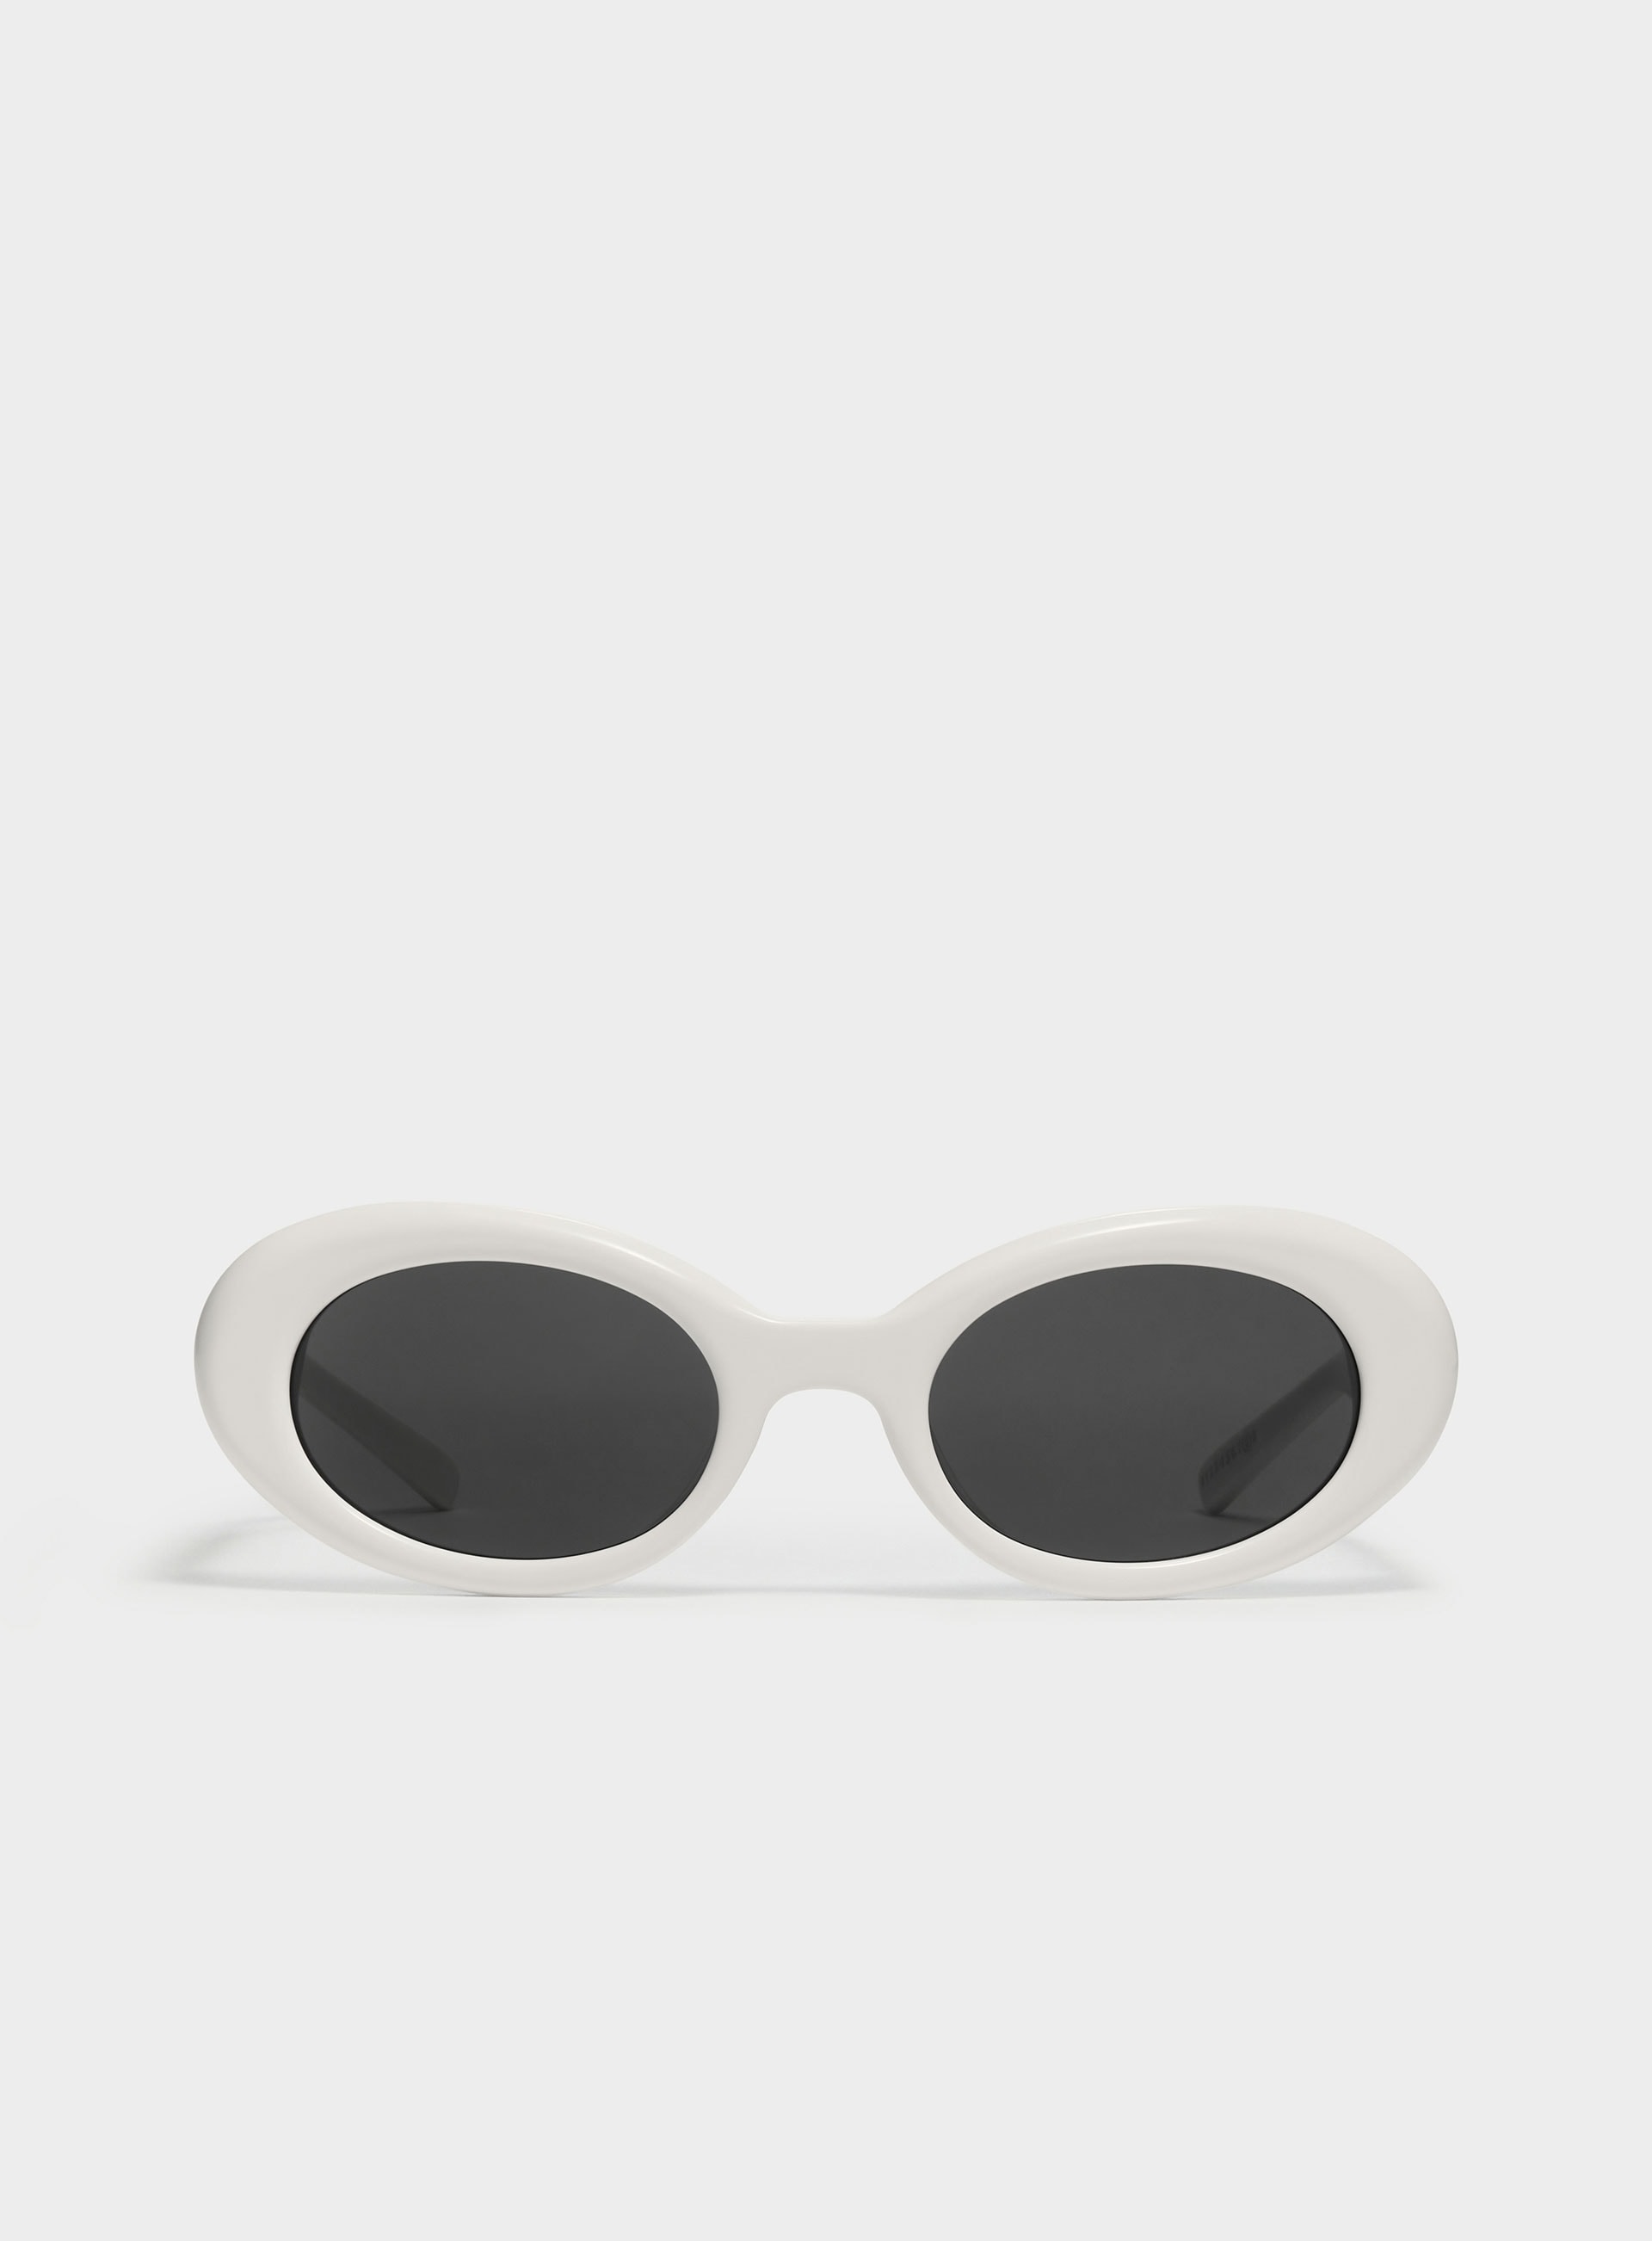 Sunglasses | GENTLE MONSTER Official Site